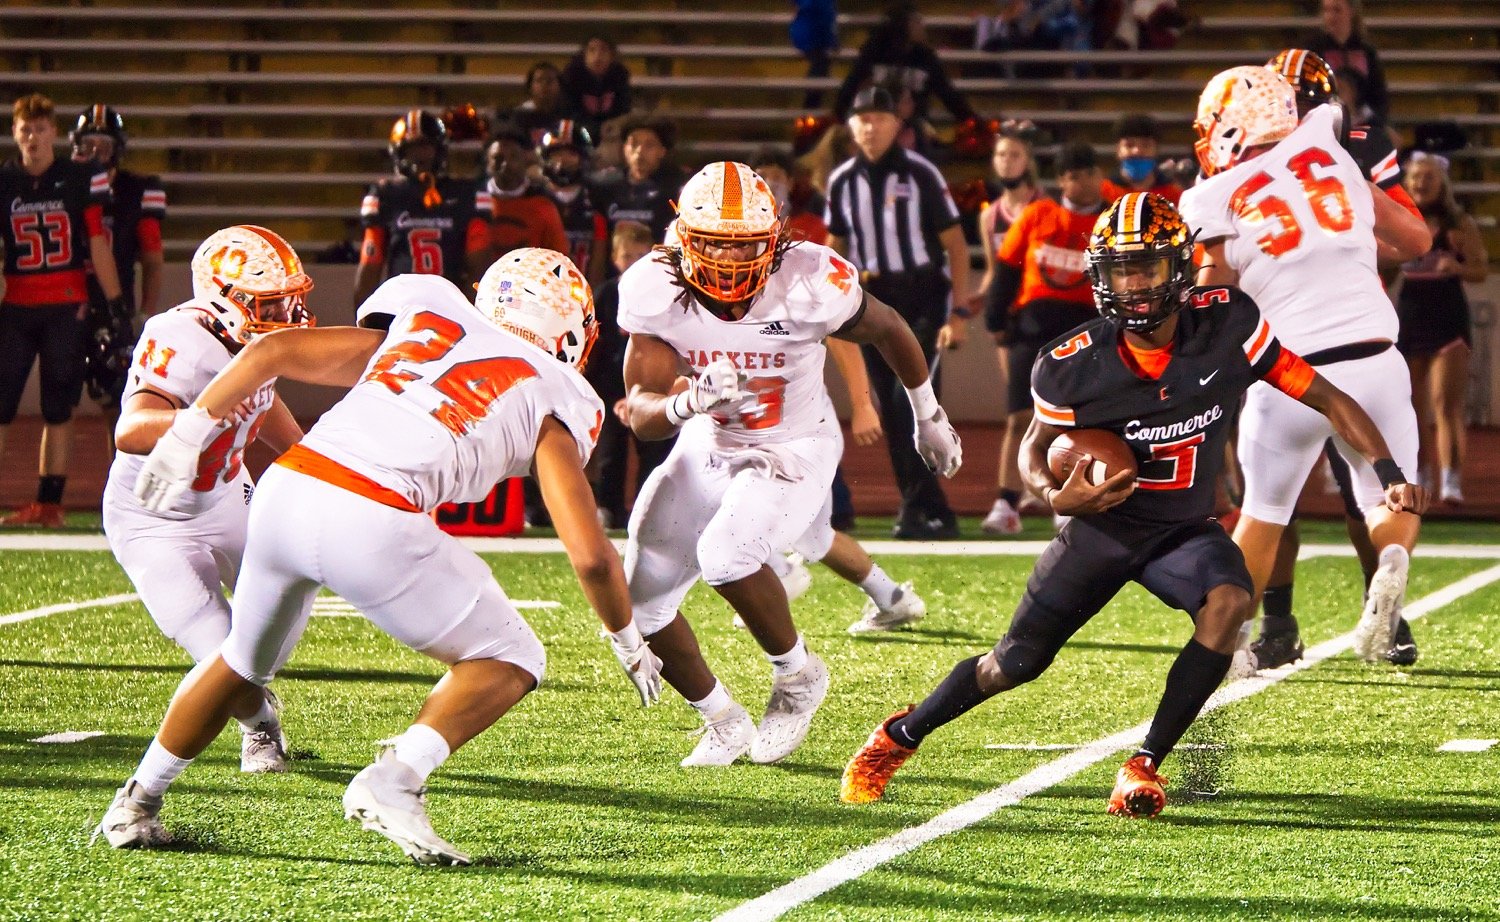 Hunter Wright (40), Kobe Kendrick (24), and Trevion Sneed have the crafty Commerce quarterback surrounded, with almost nowhere to run. Jackson Anderson (56) was name offensive lineman of the year.  Wright was named to first team on both offense and defense. Kendrick was selected defensive MVP and Sneed was chosen all-district MVP. [print available]